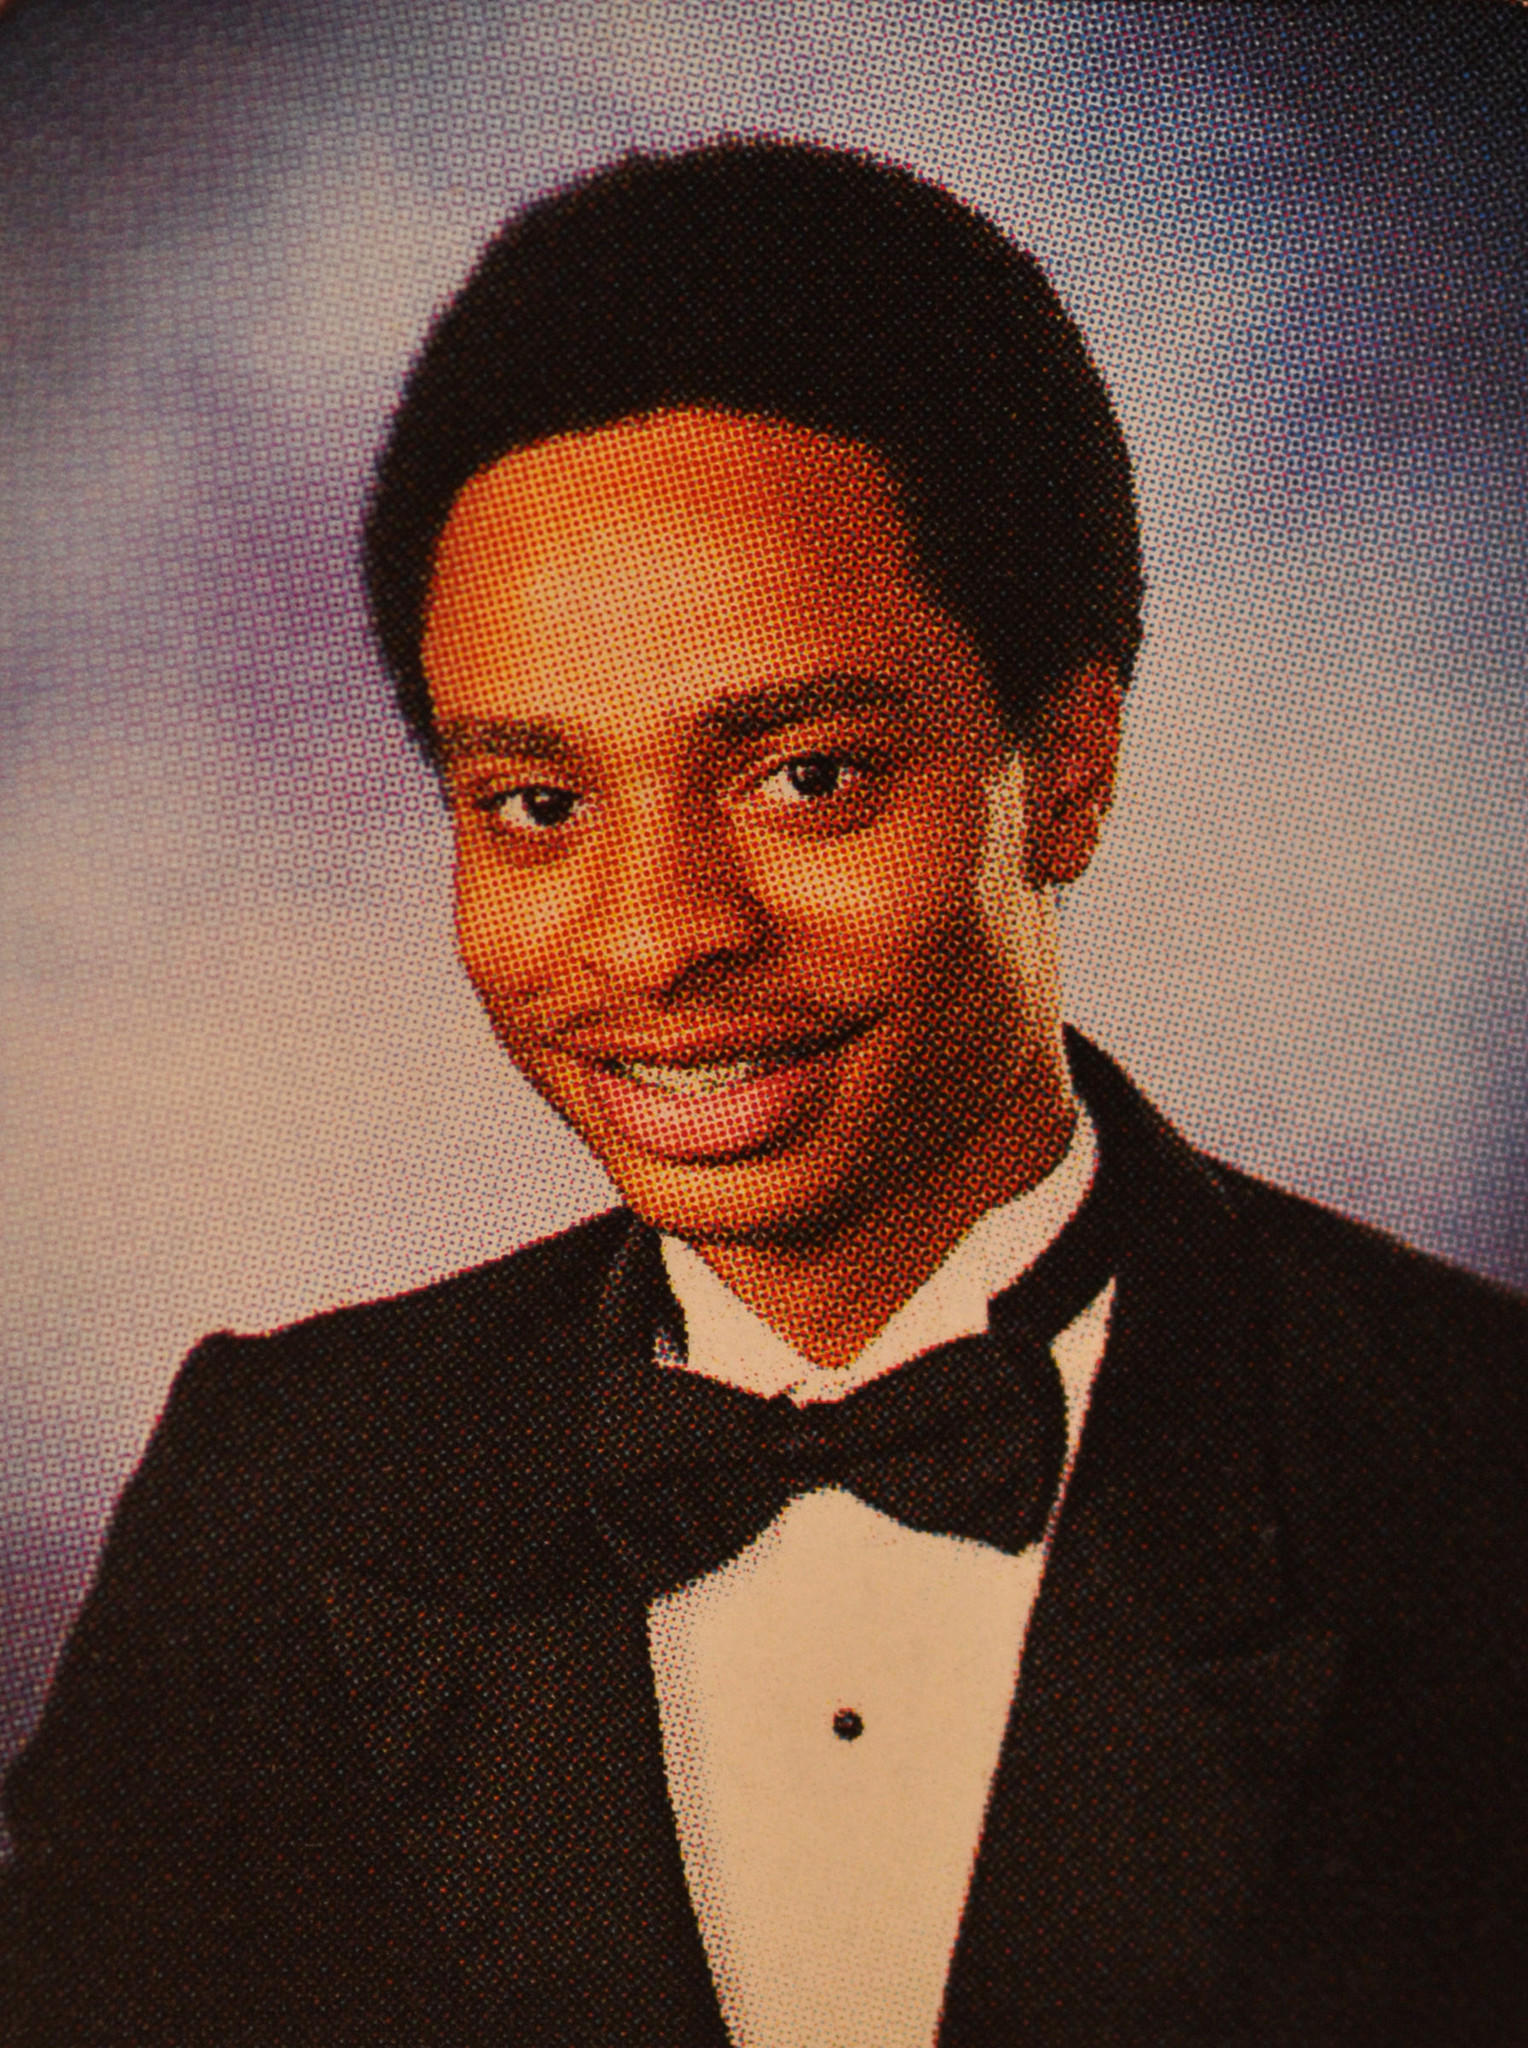 A senior yearbook photo of Darion Aguilar from the Blake High School, Silver Spring, - 1528x2048